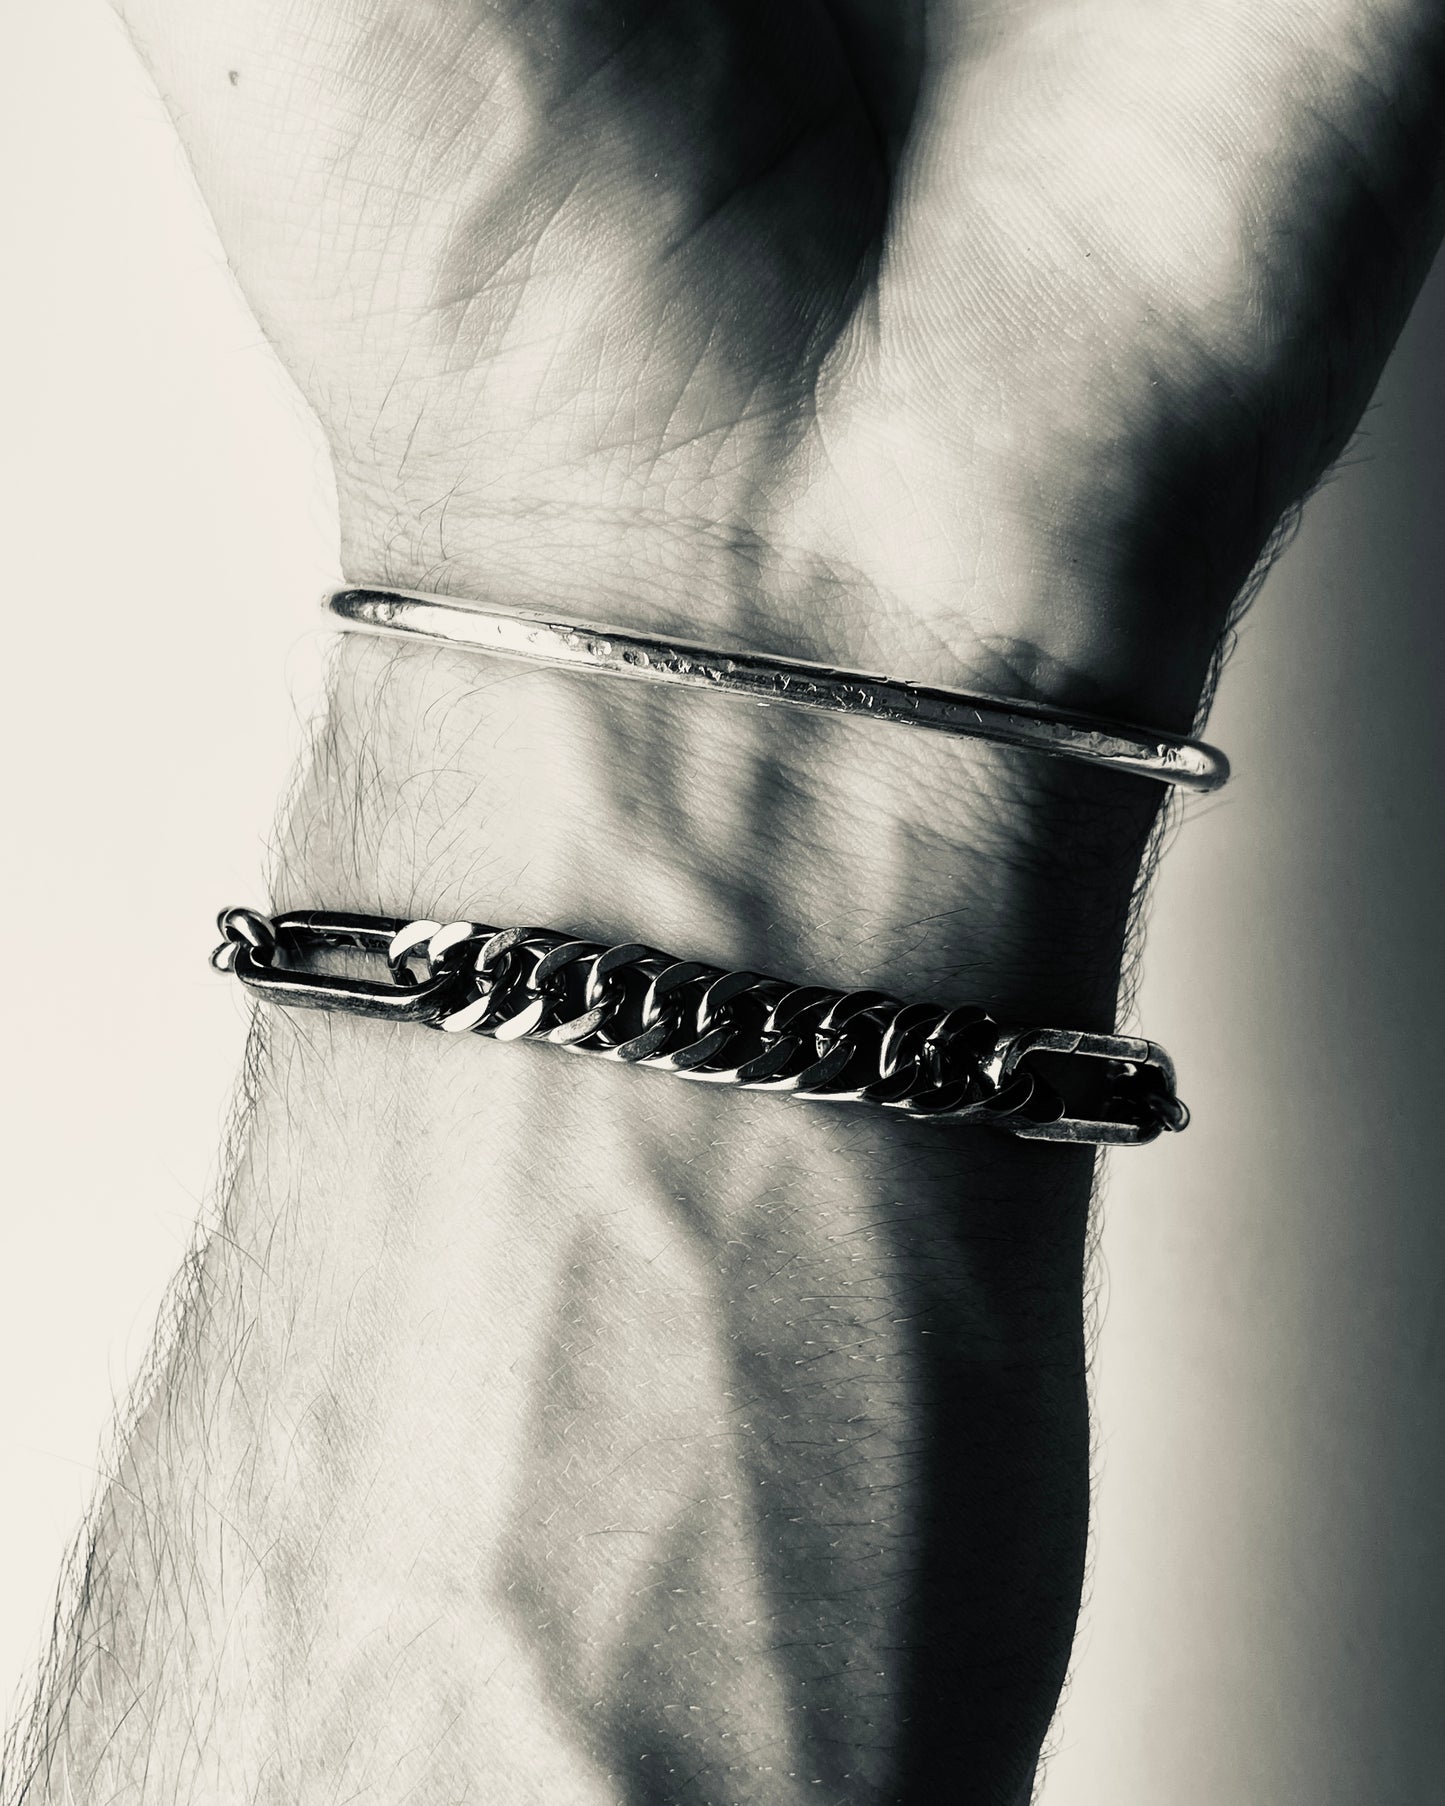 CHAINED BRACELET